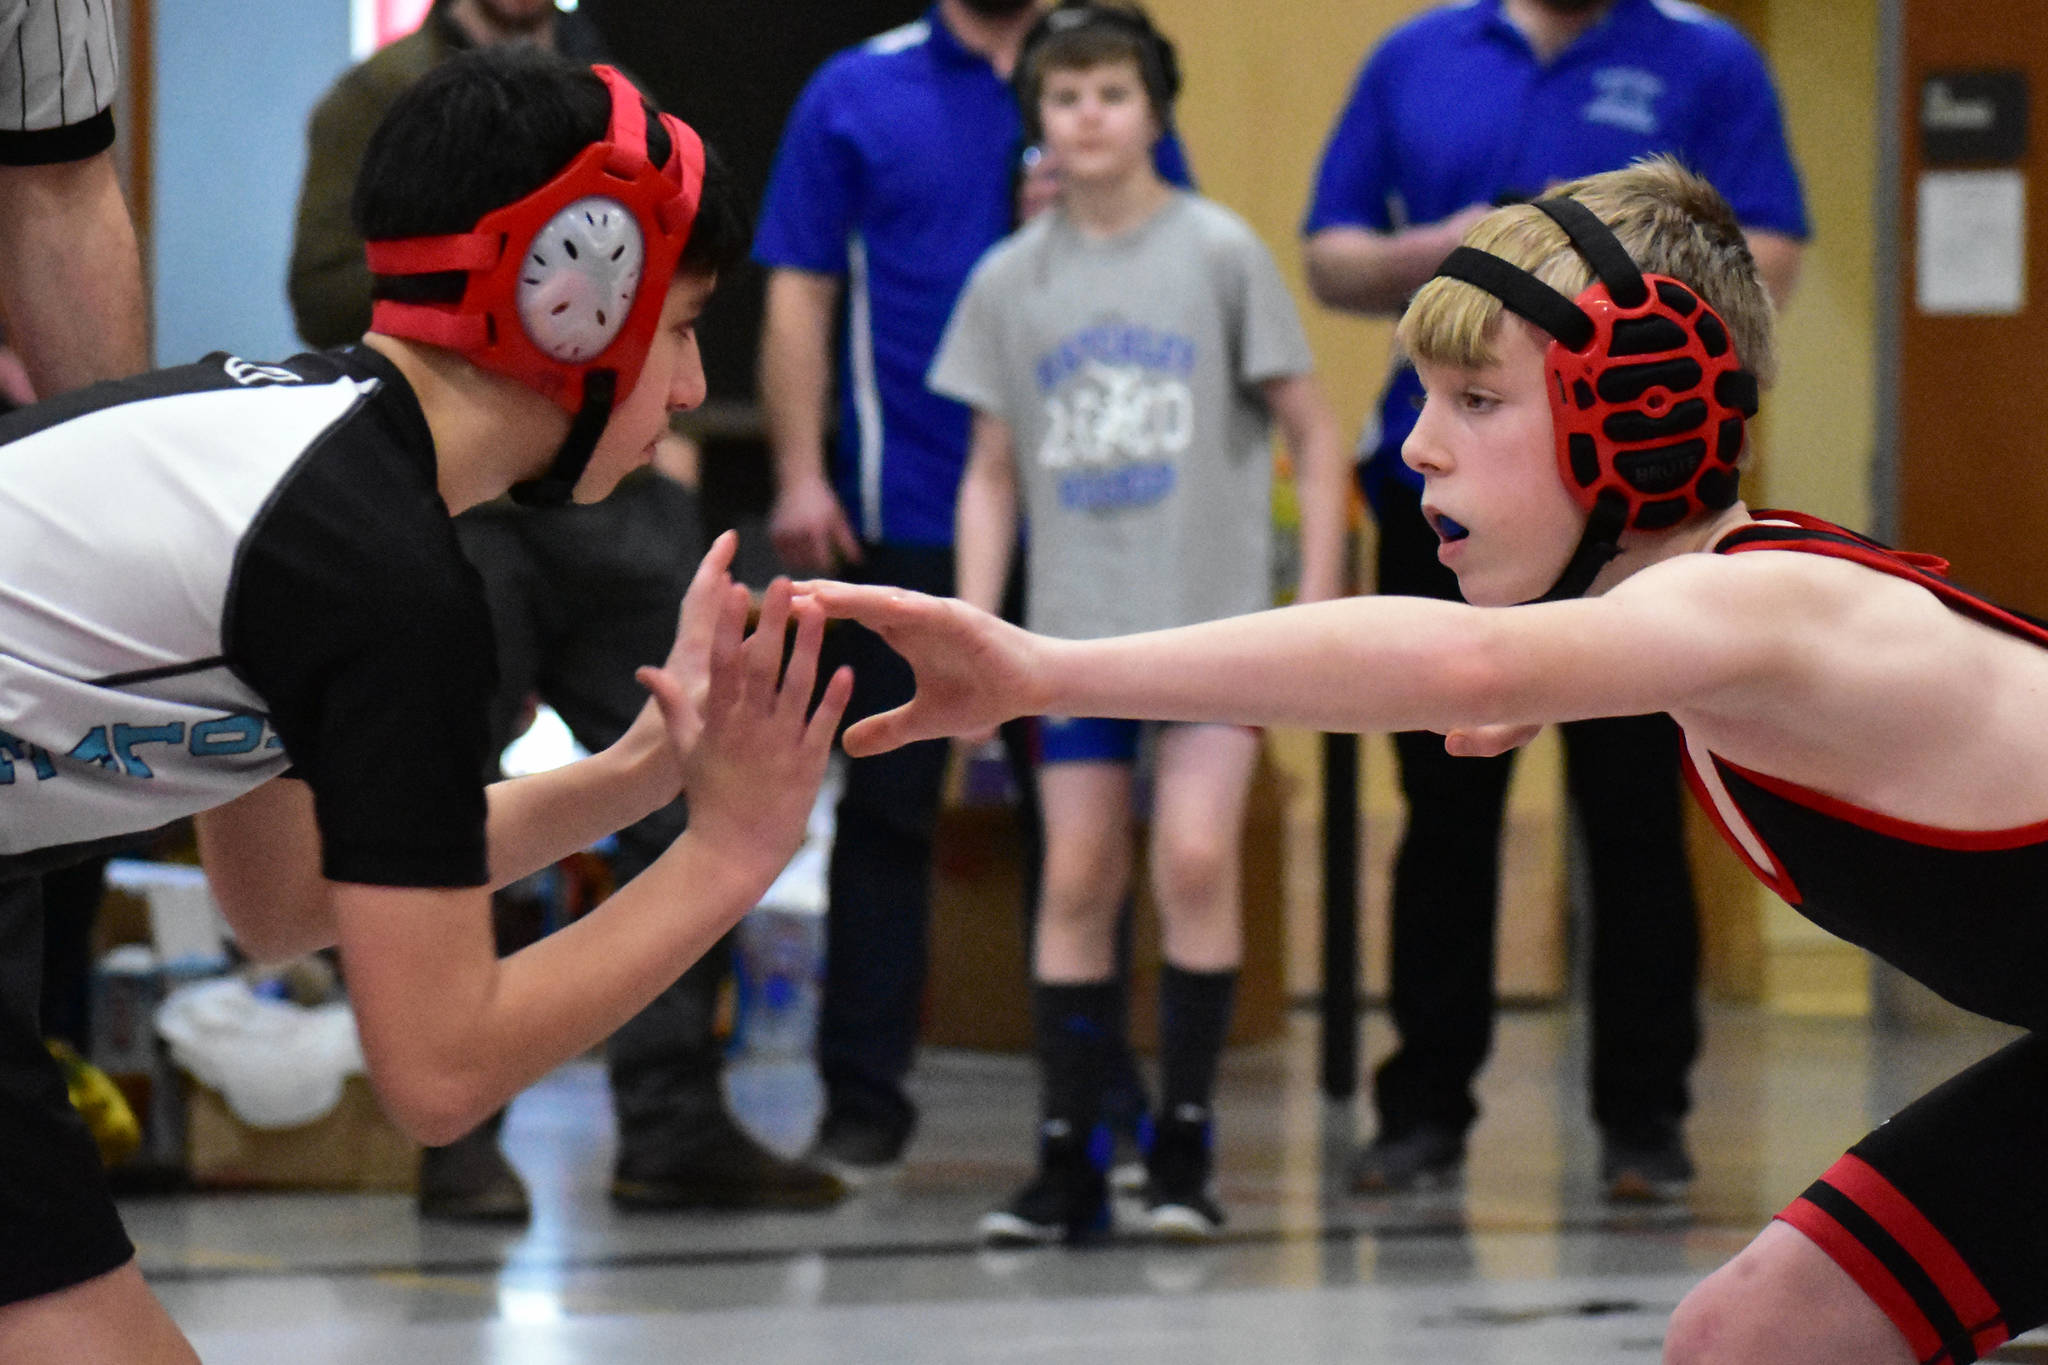 Two students face off for a match at the 2020 Southeast Alaska Middle School Wrestling Championship at Floyd Dryden Middle School on Friday. (Peter Segall | Juneau Empire)